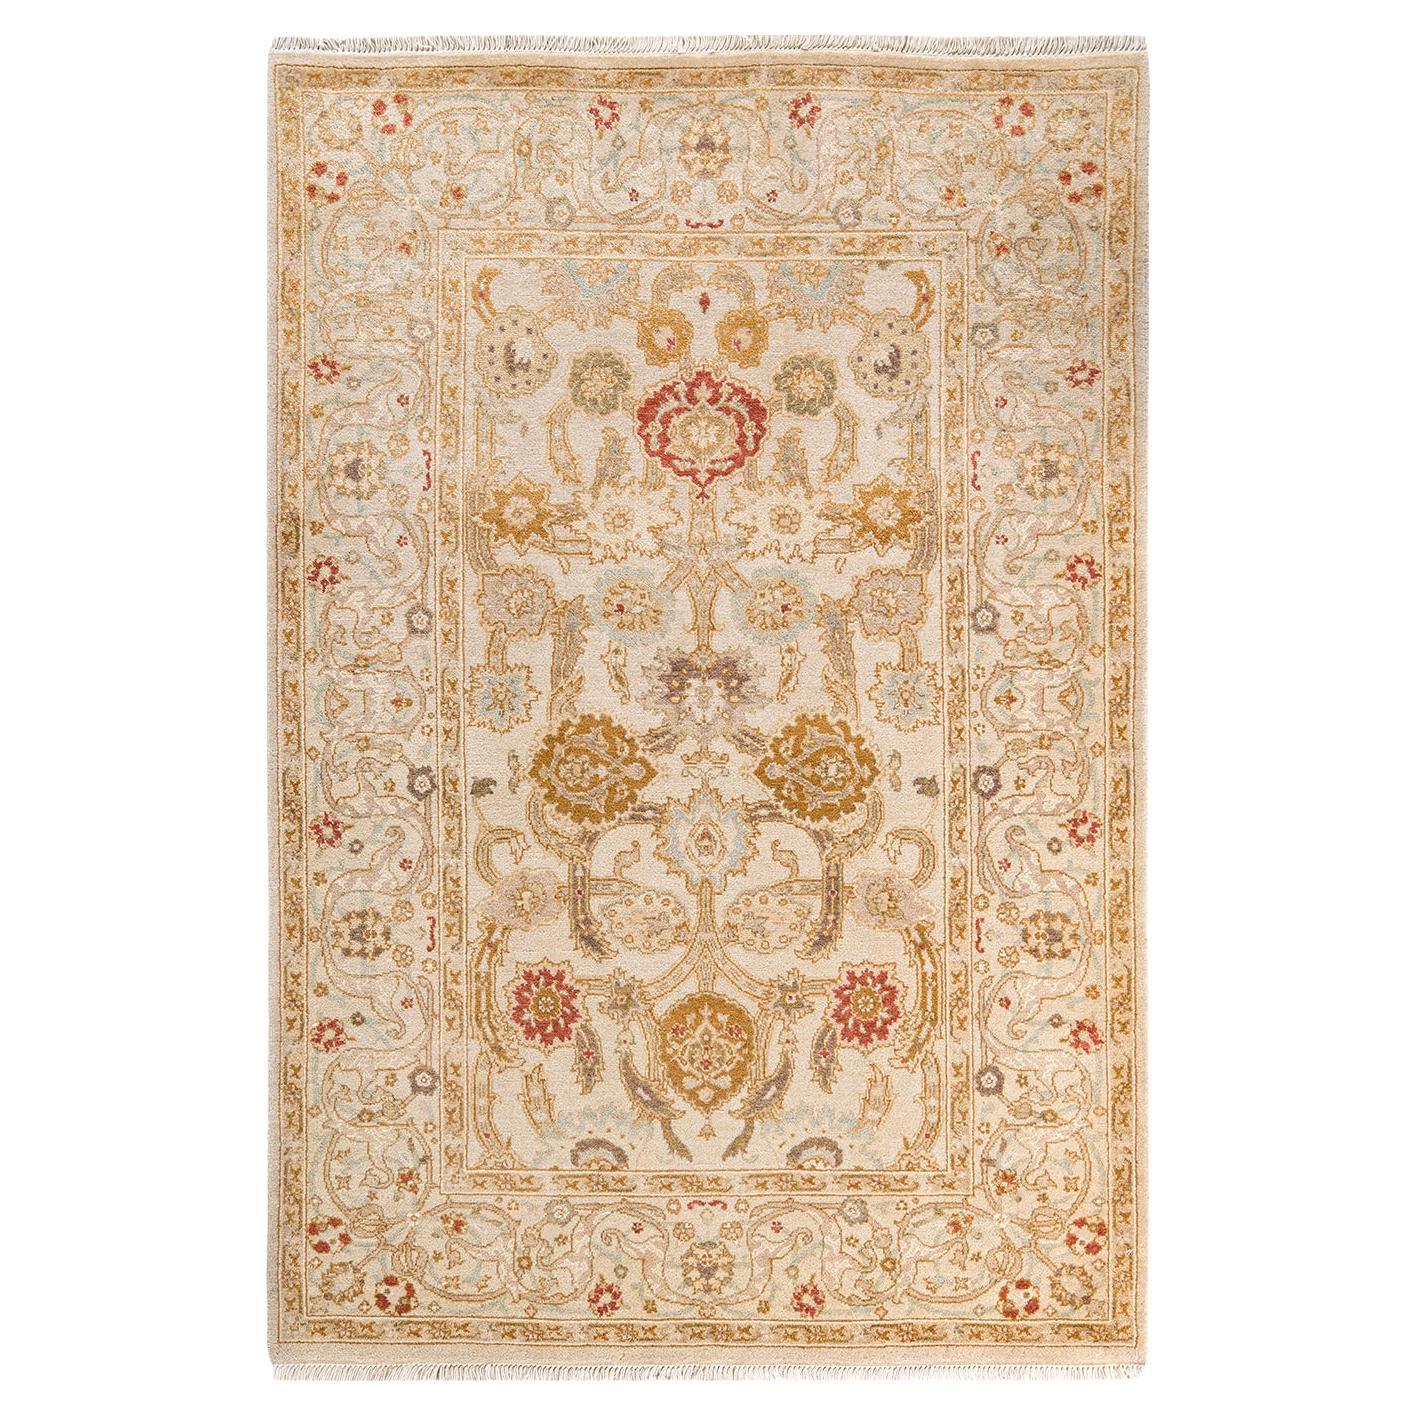 One of a Kind Hand Knotted Contemporary Floral Ivory Area Rug